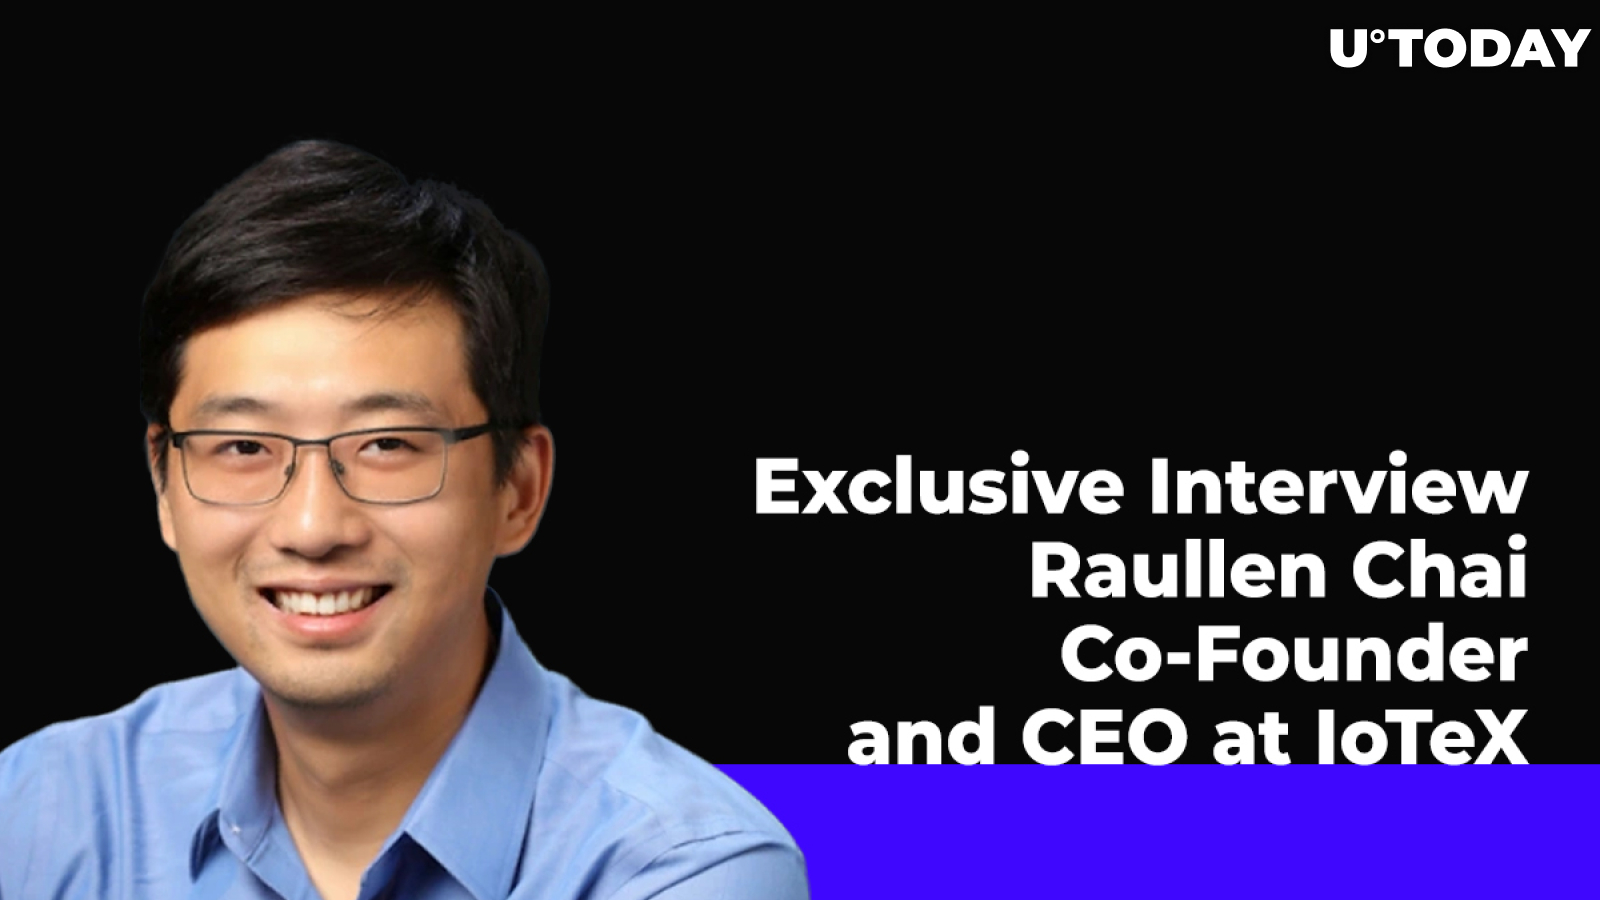 MachineFi Through Eyes of IoTeX Co-Founder and CEO Raullen Chai in Exclusive Interview